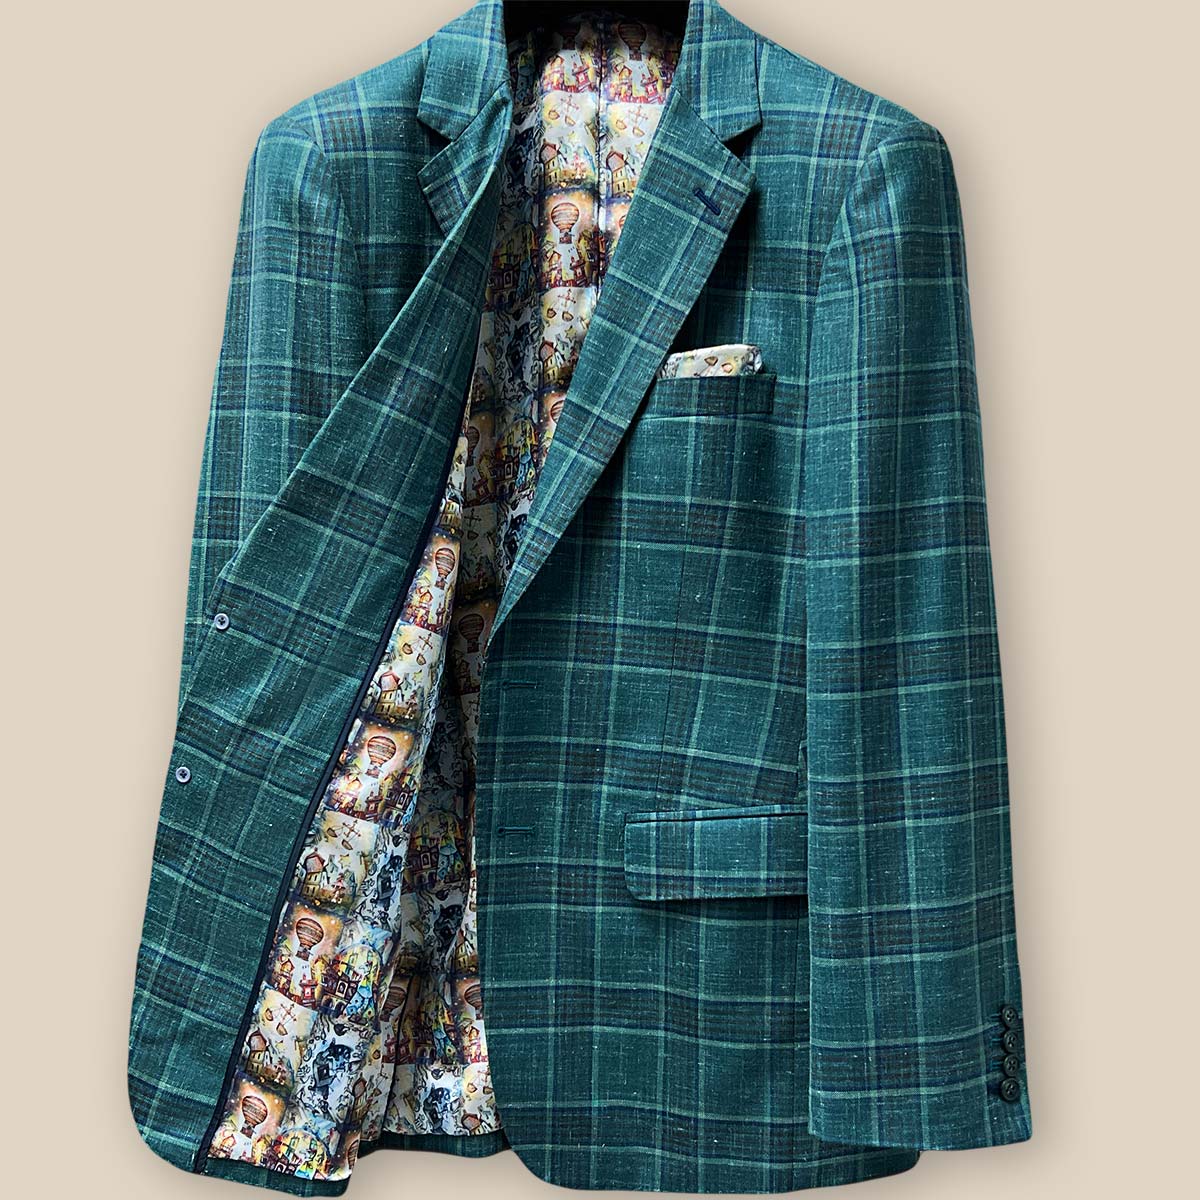 Inside right view of the Westwood Hart hunter green with navy and chocolate brown plaid mens sport coat, displaying the inner pockets and flash lining.